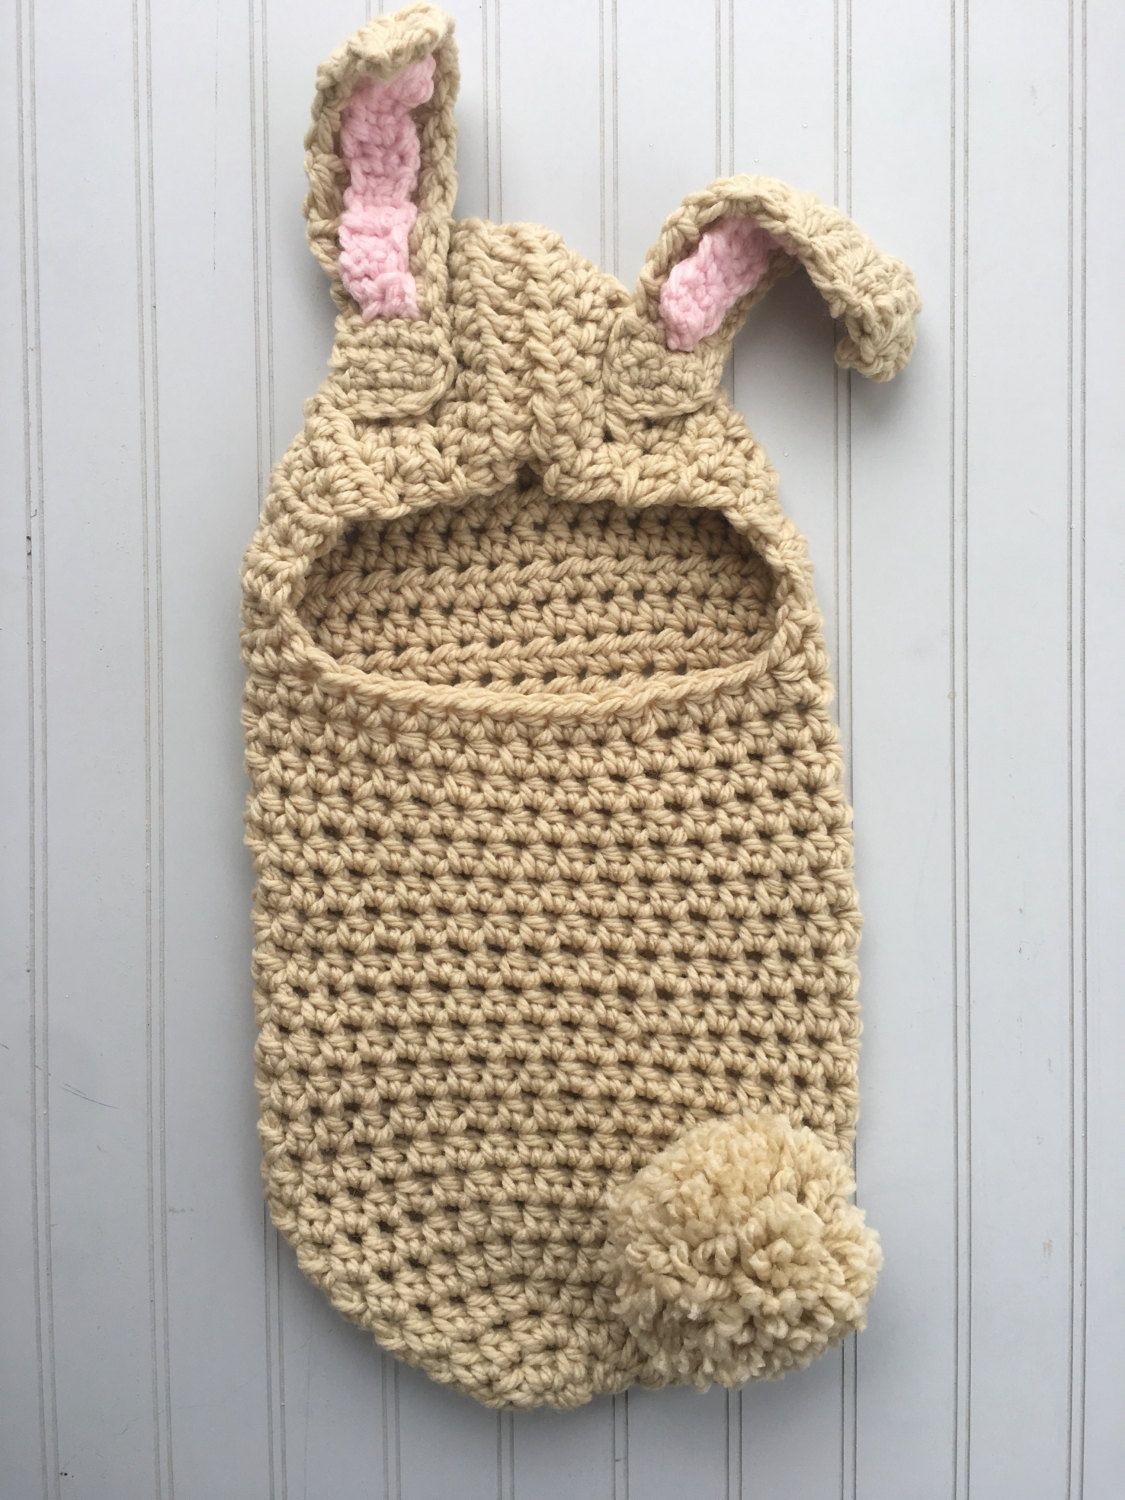 Crochet Pattern - Bunny Cocoon Swaddle Newborn Size | Kids Crochet - Free Printable Crochet Patterns For Baby Cocoons